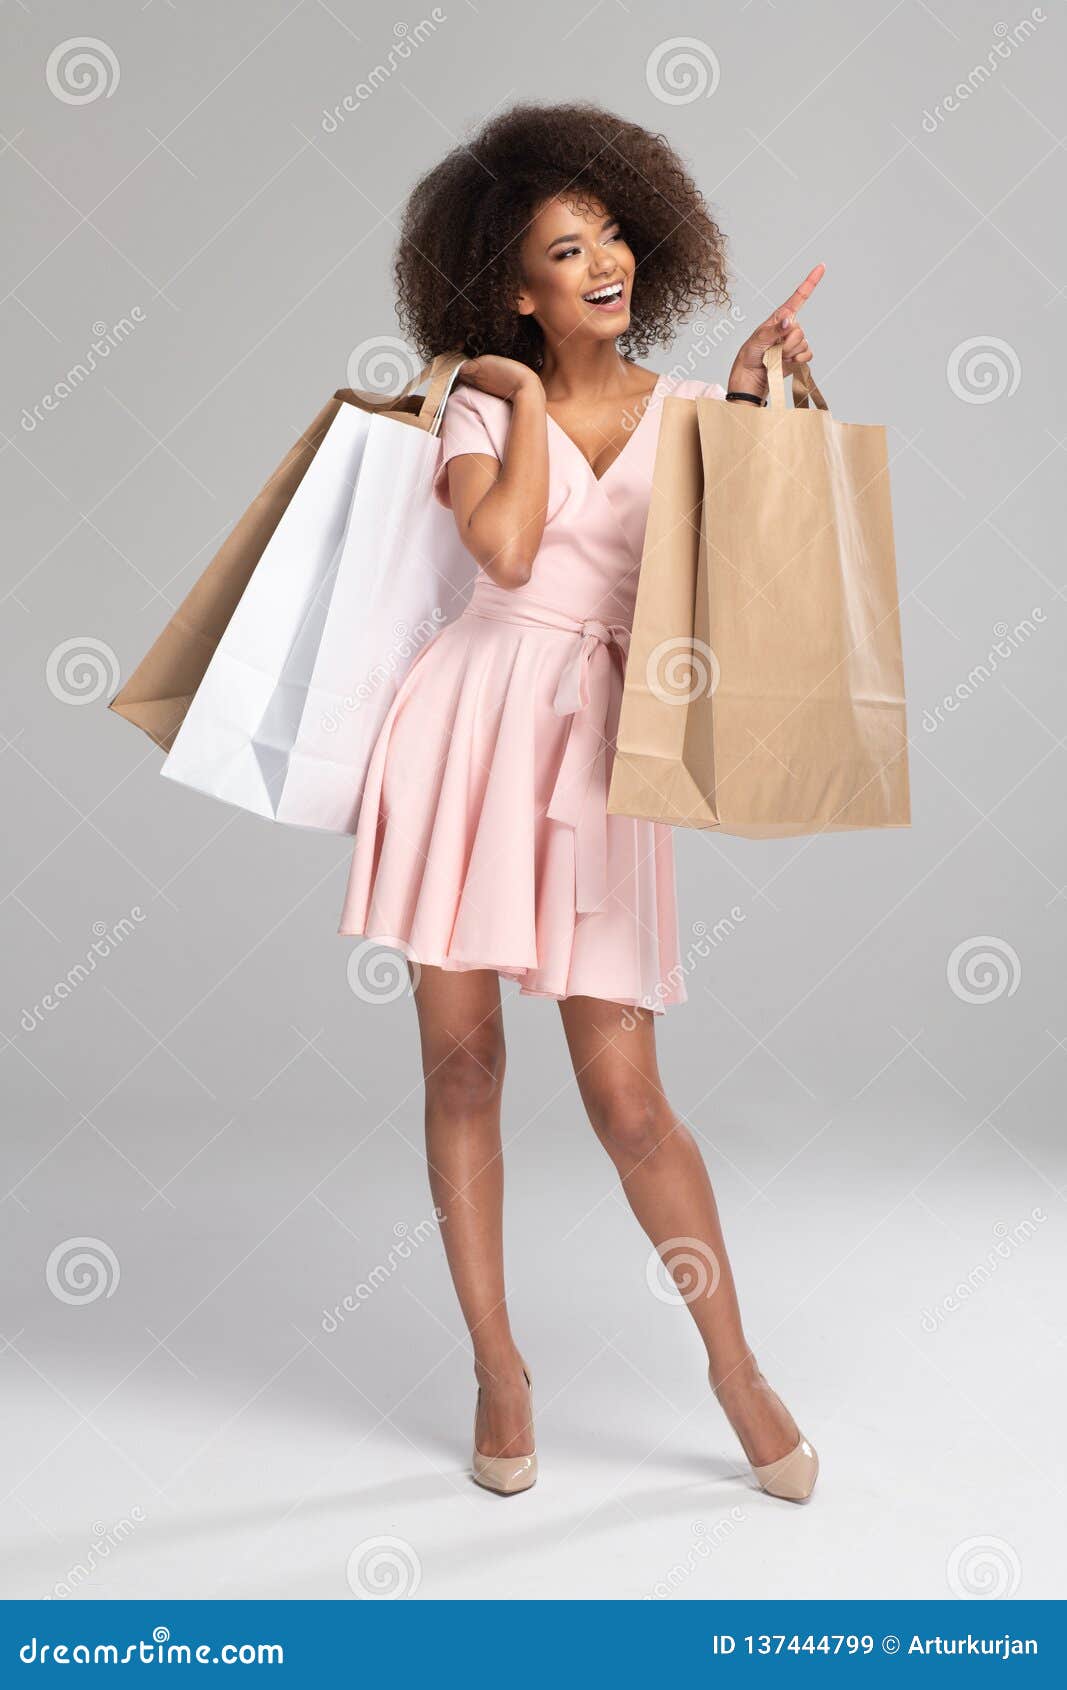 happy woman holding shopping bags